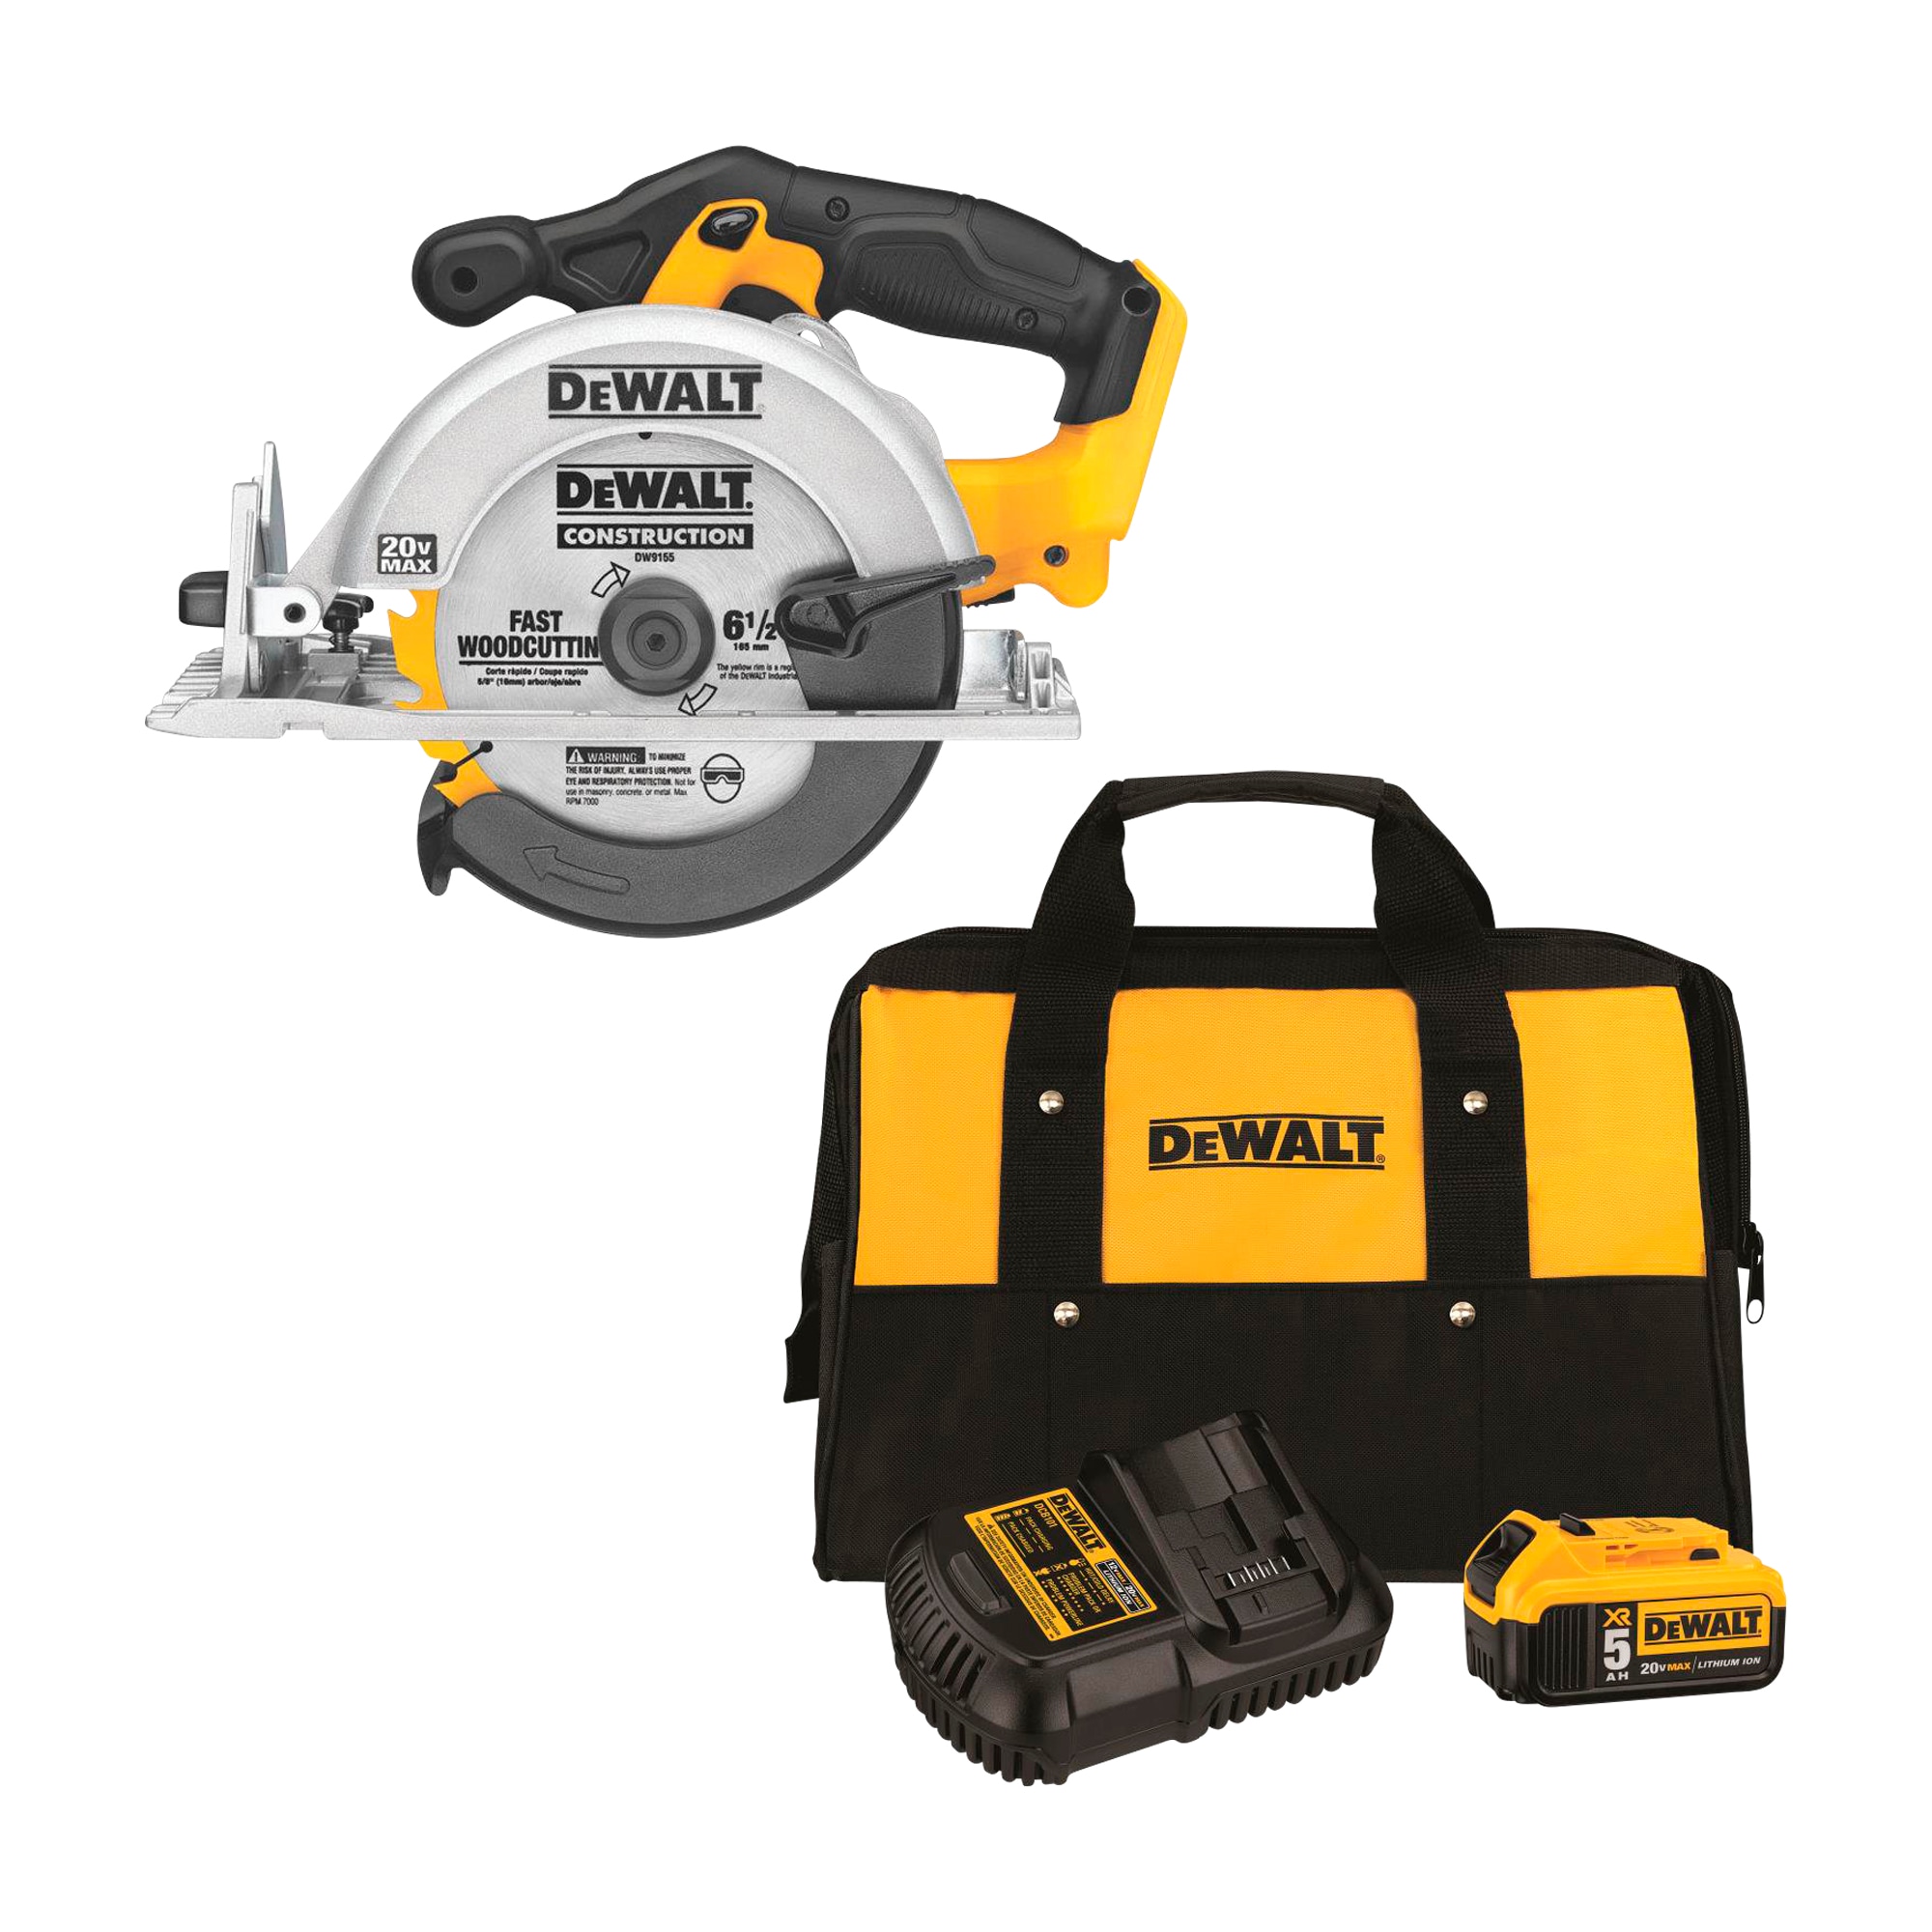 DEWALT 20-Volt Max 6-1/2-in Cordless Circular Saw & XR 20-Volt Max 5 Amp-Hour Lithium Power Tool Battery Kit (Charger Included)